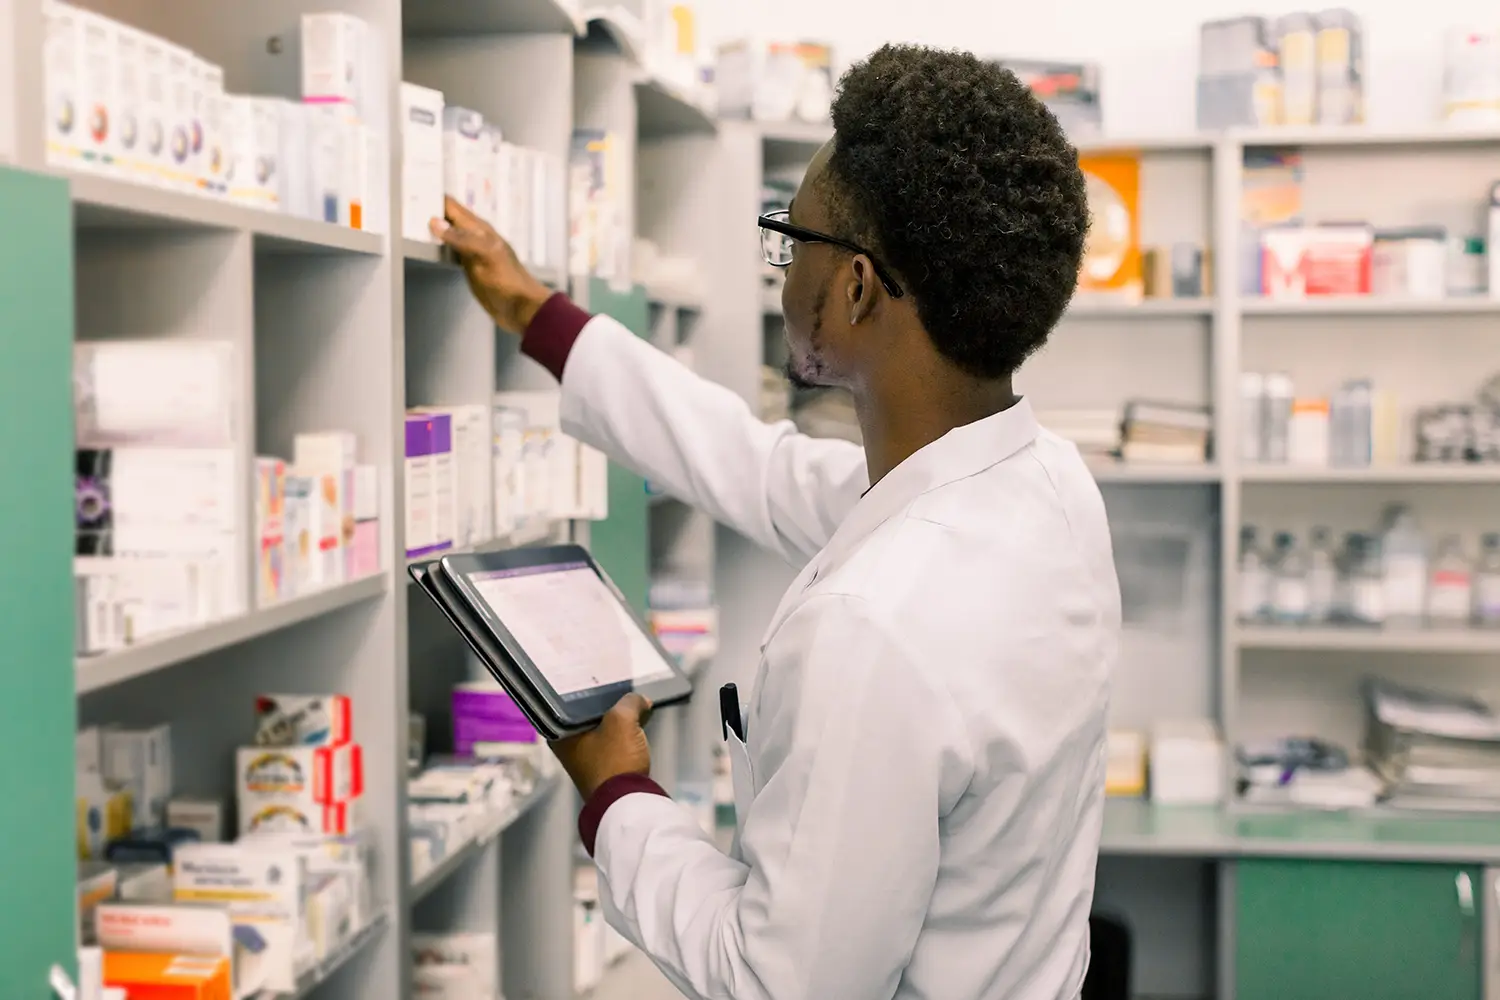 A man looks at boxes of medication on shelves in a pharmacy